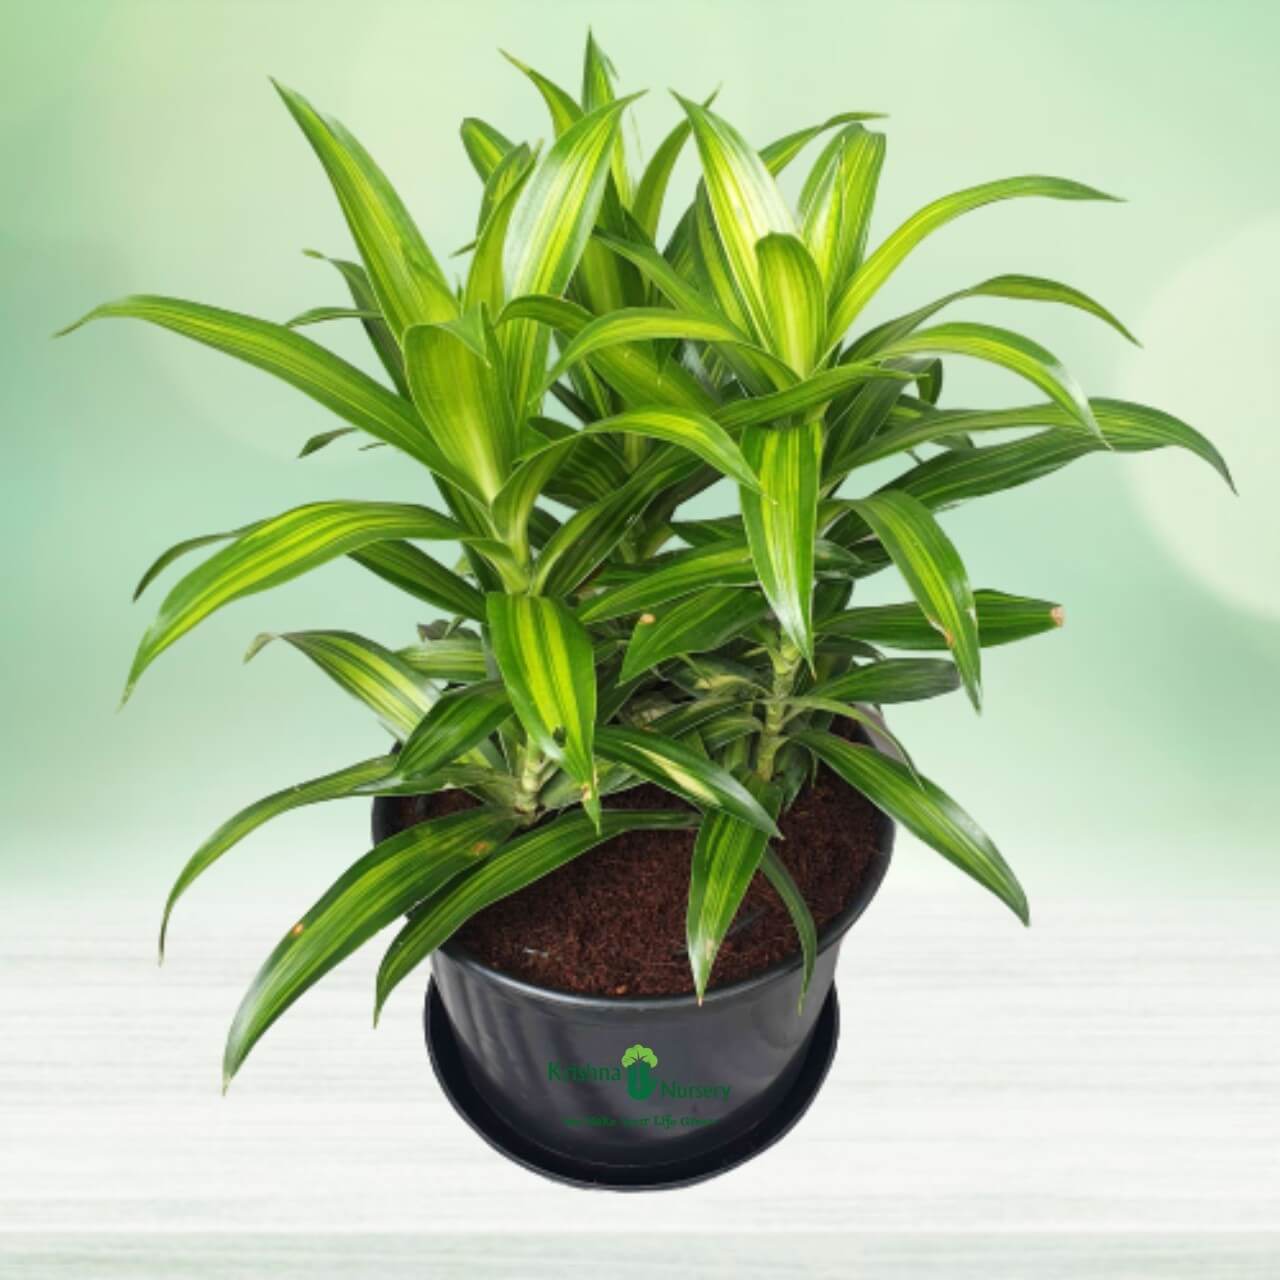 Green Song of India Plant - 8 Inch - Black Pot